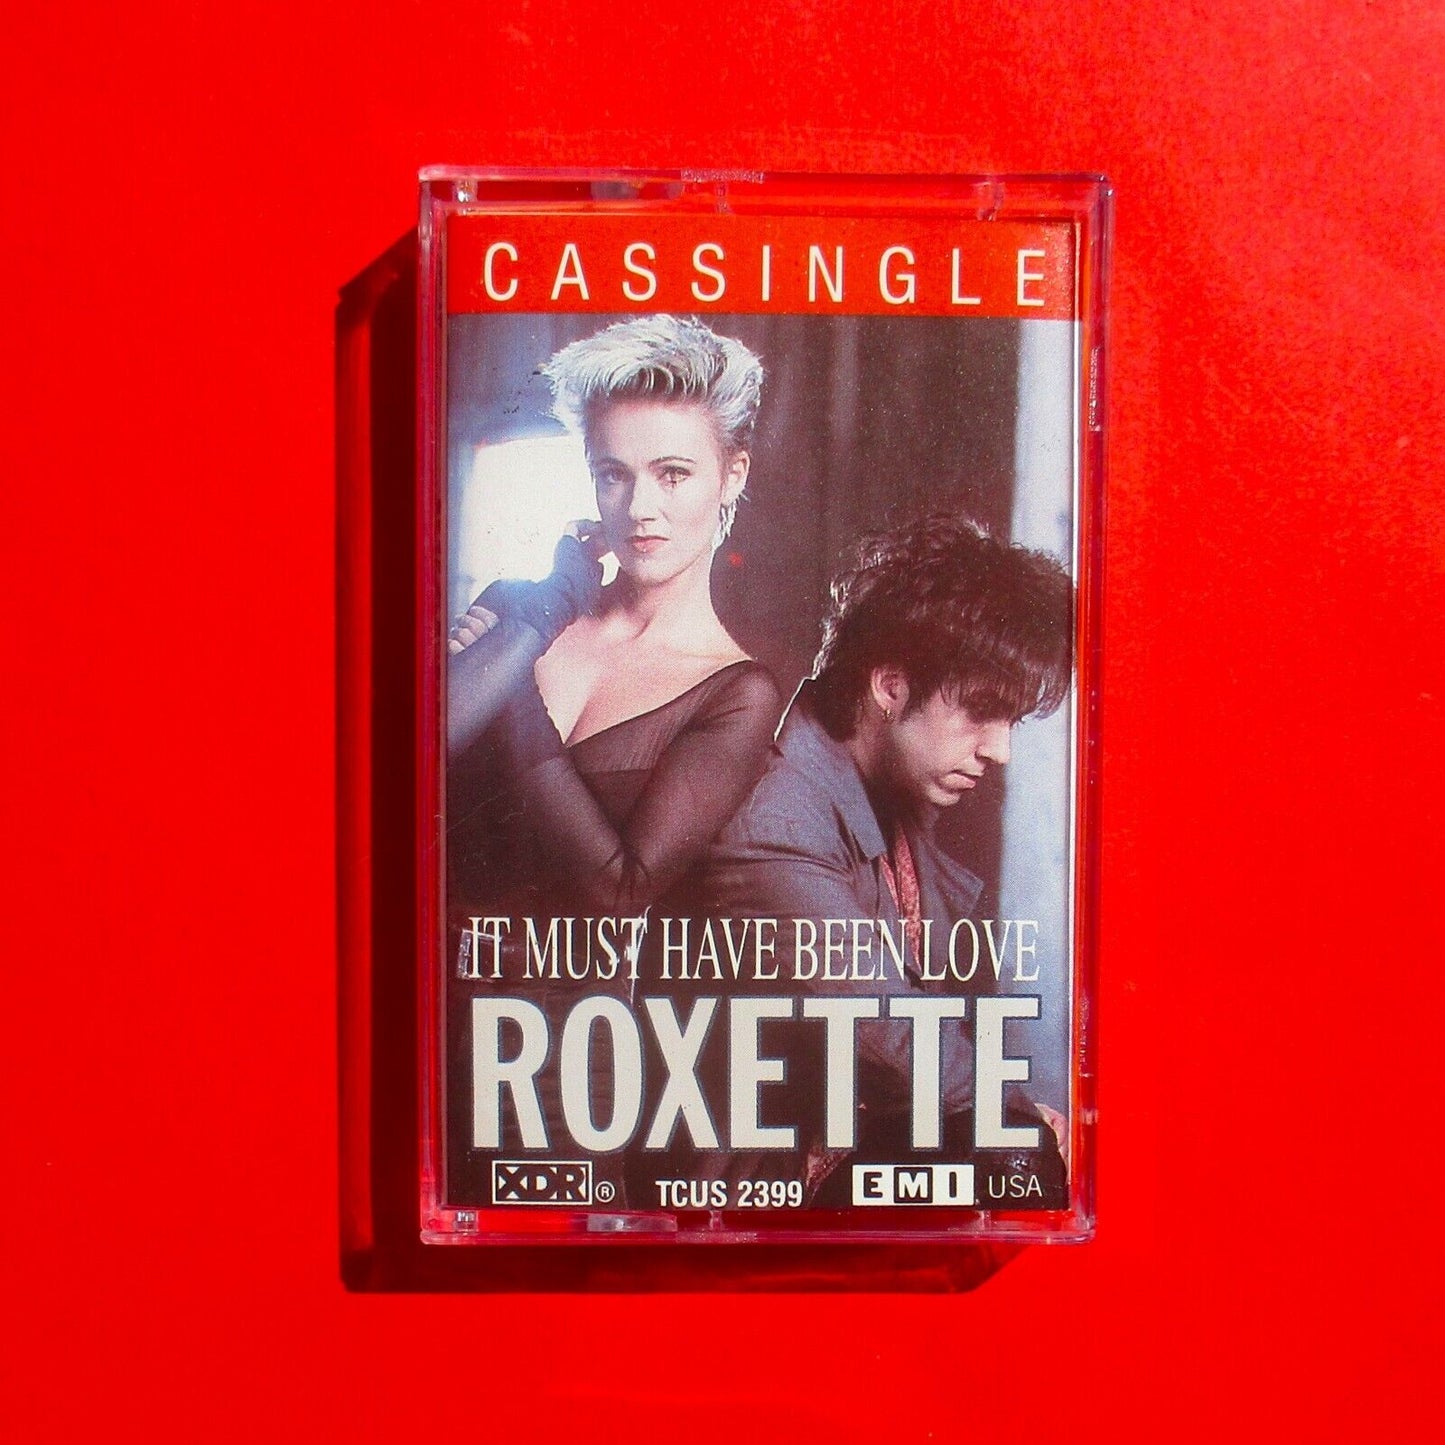 Roxette ‎It Must Have Been Love 1990 Yellow Cassette Single